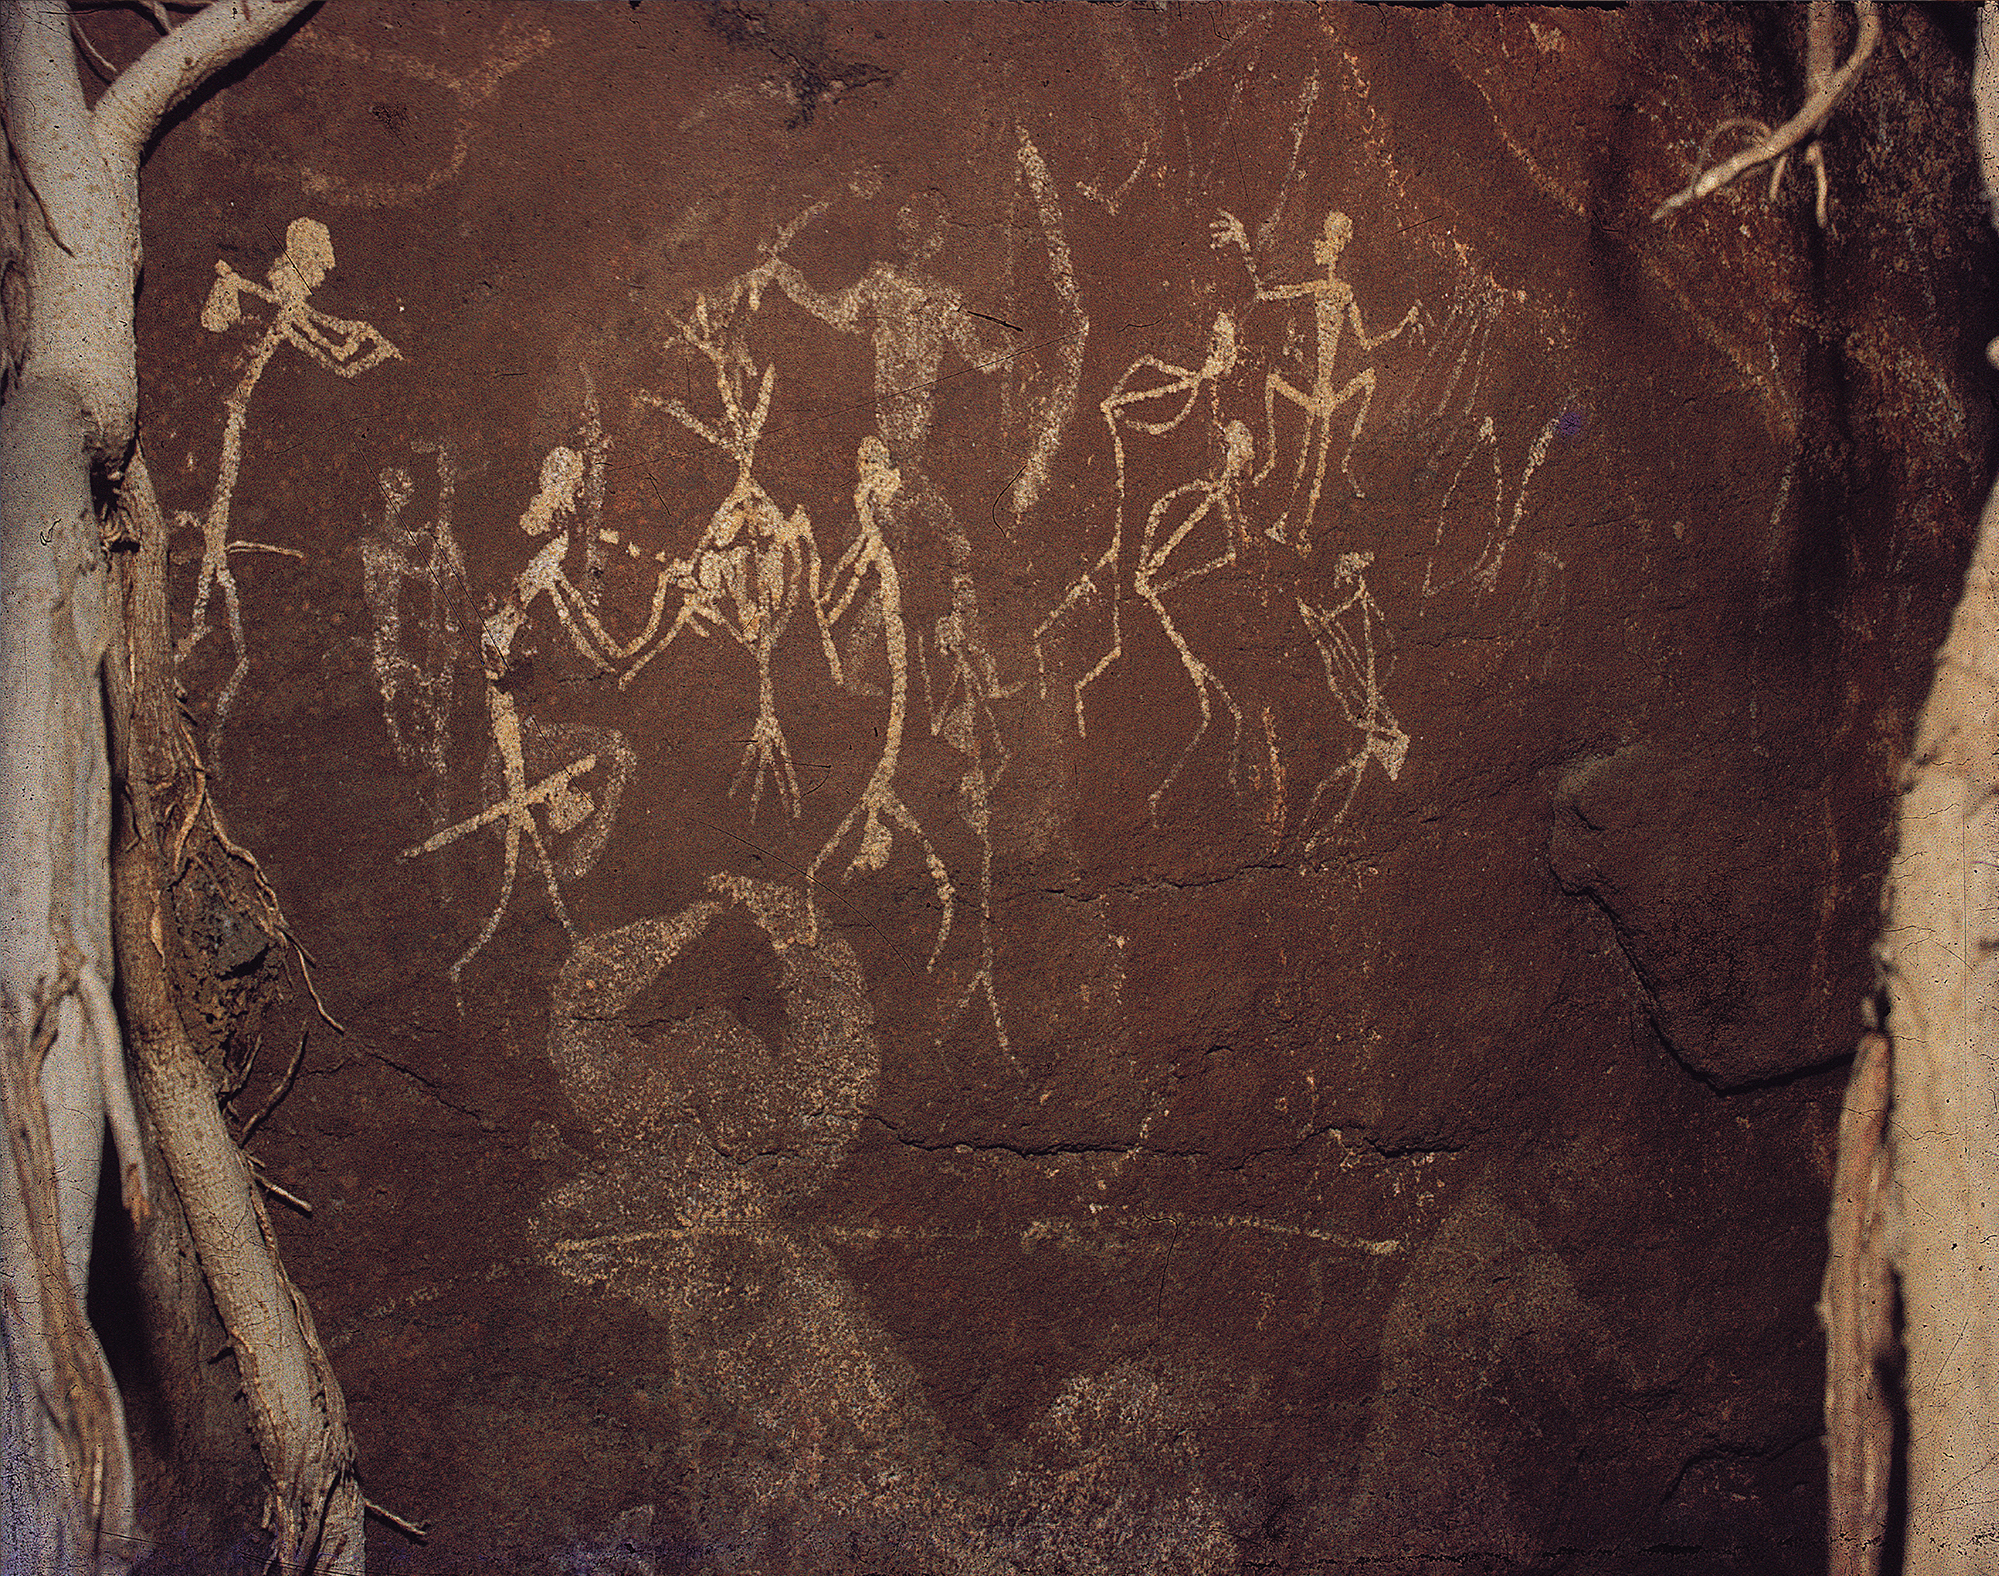 Superimposed panels painted with white clay like kaolin. First layer images were made by rubbing the dry color nodule, and the top layer scene of a tree worship and musics is painted with wet color